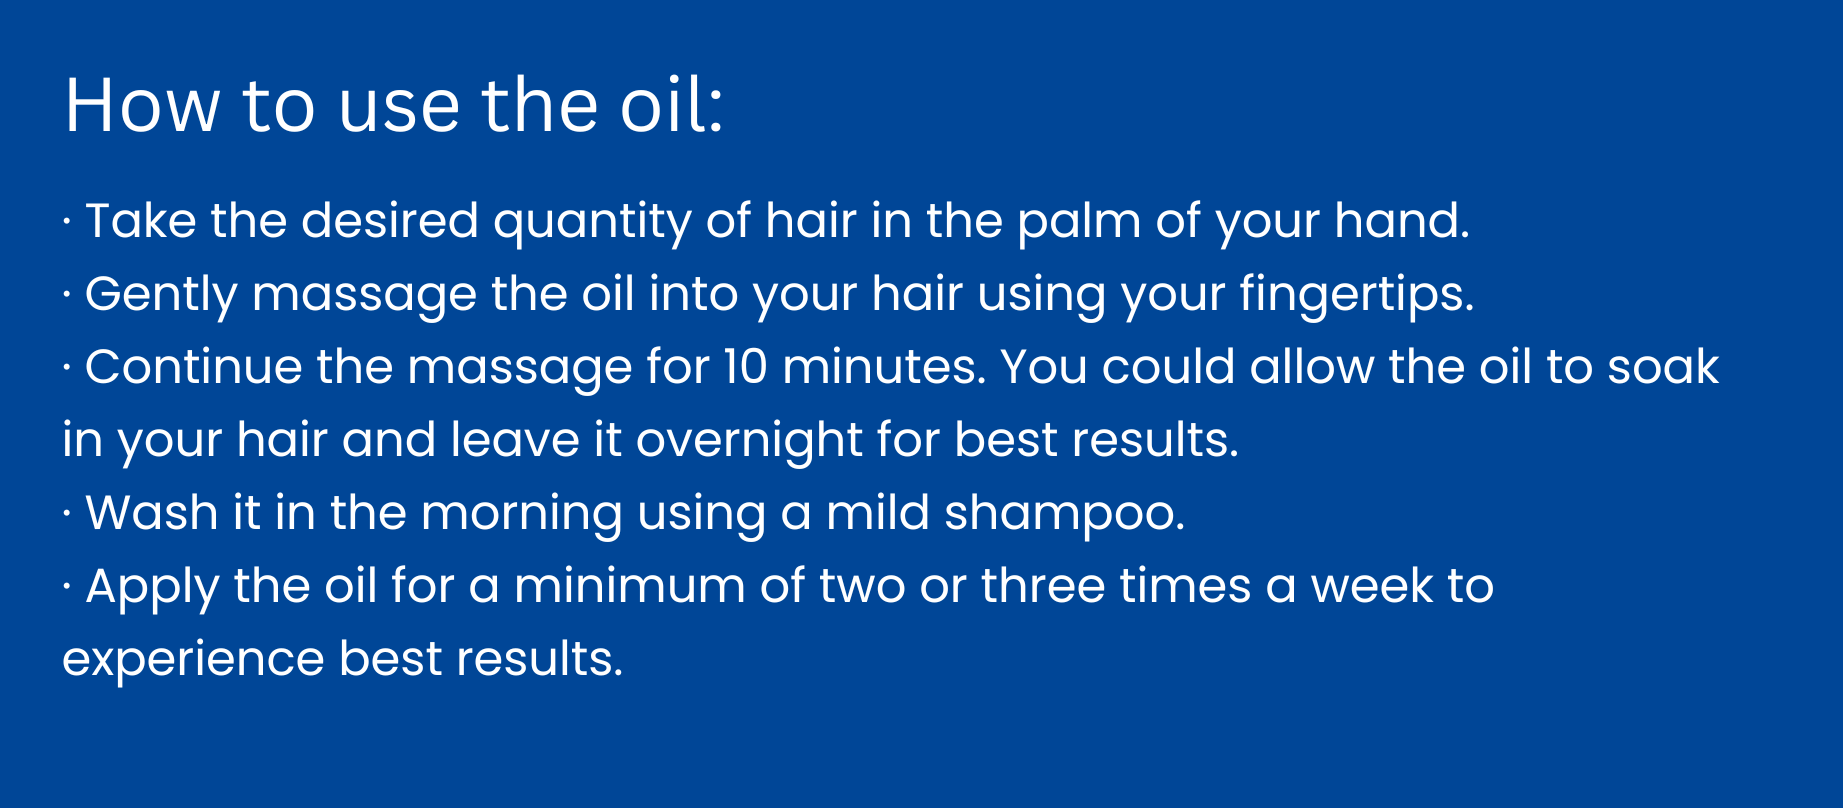 How to use the hair oil for best results. 